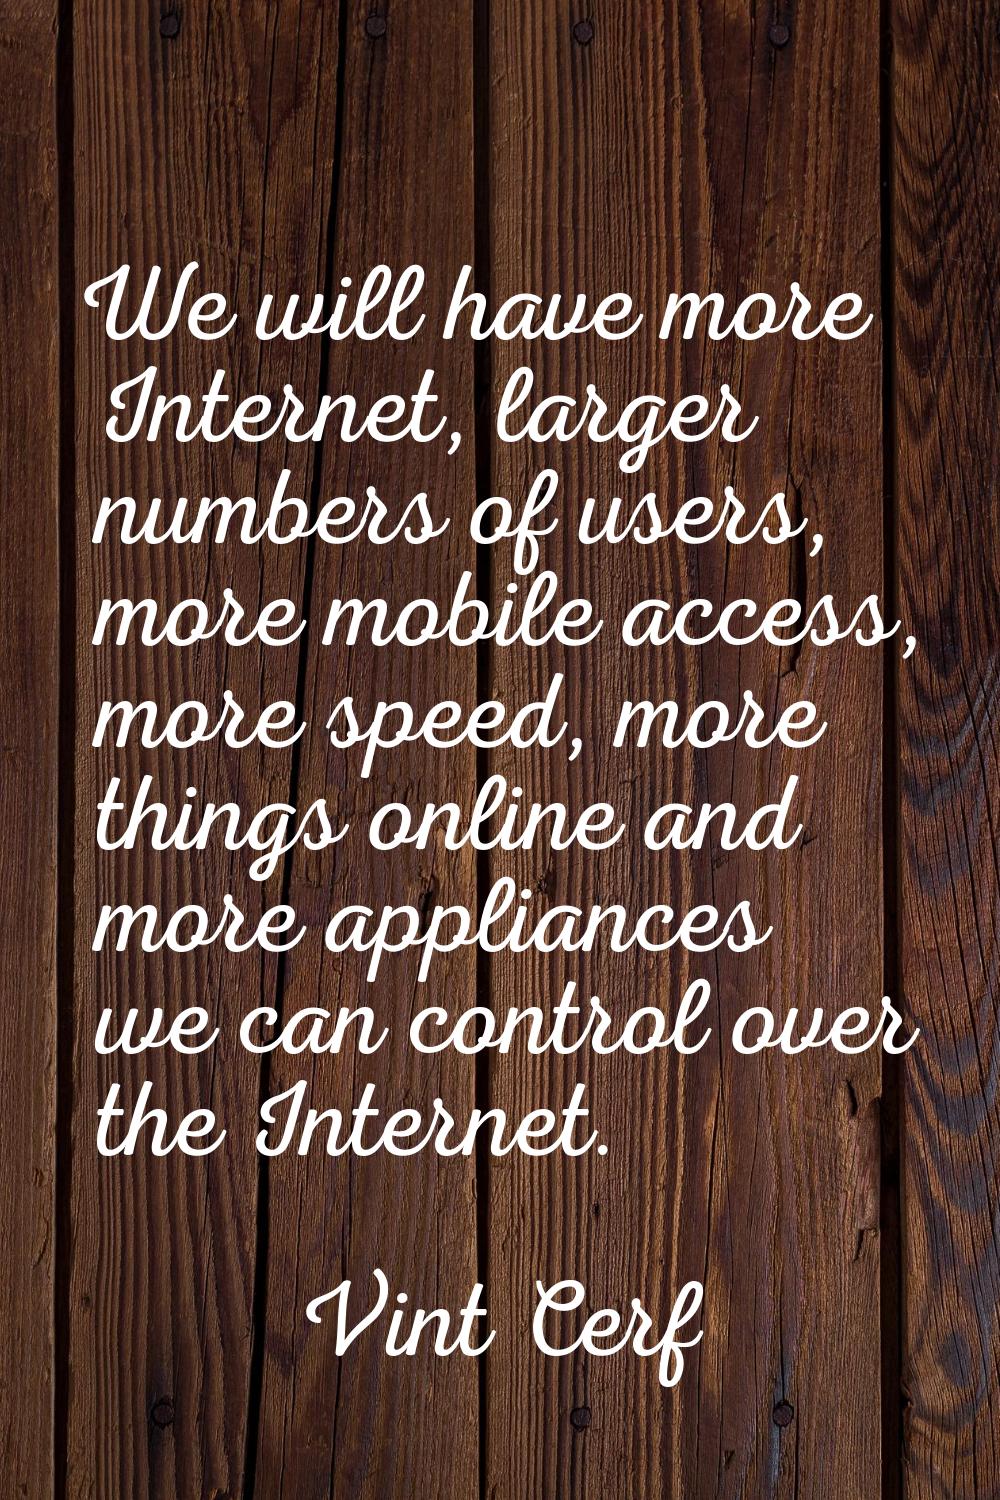 We will have more Internet, larger numbers of users, more mobile access, more speed, more things on